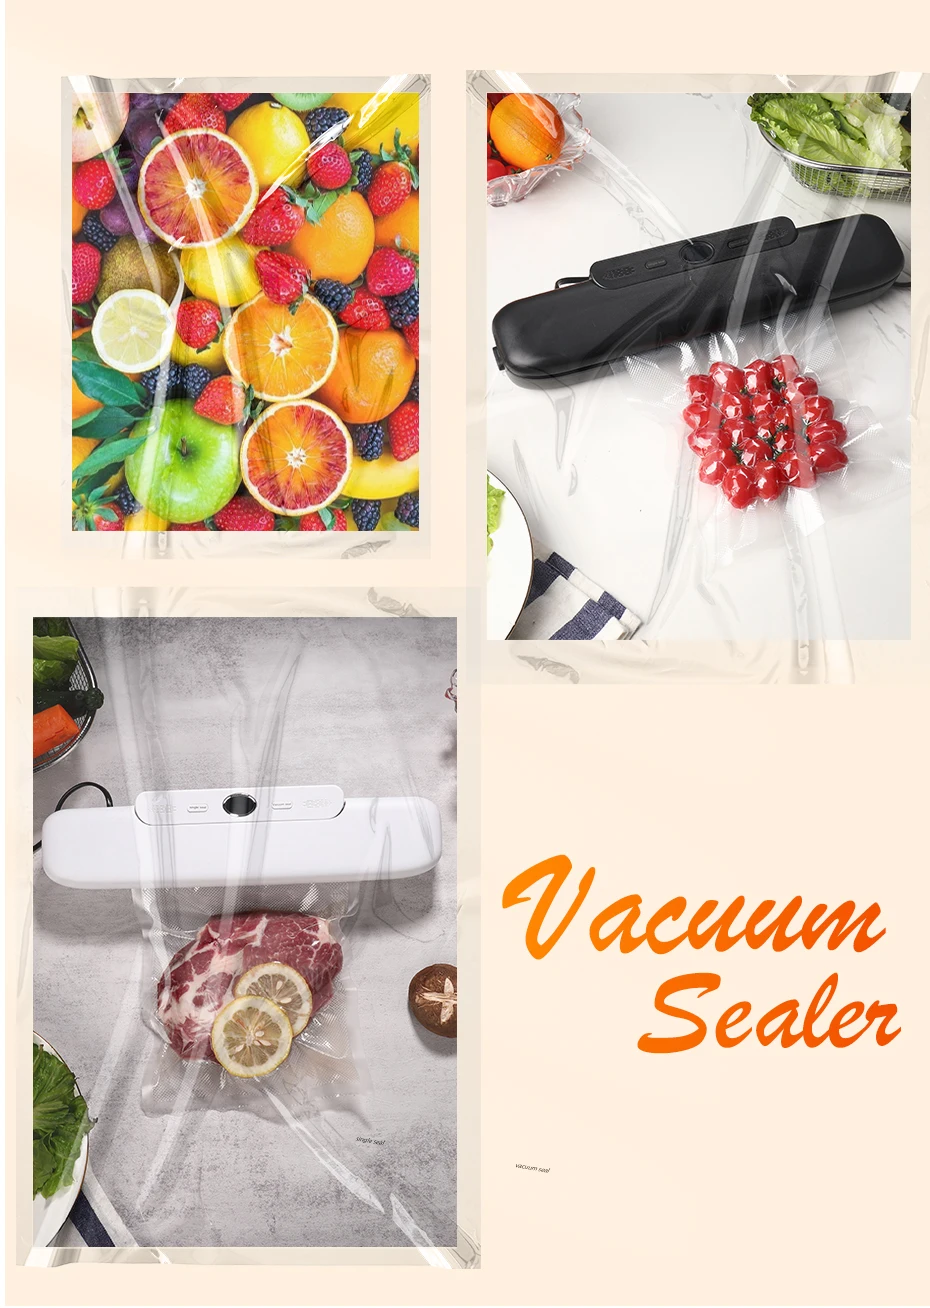 Vacuum sealer – complete household food packaging solution with free 10pcs vacuum bags included